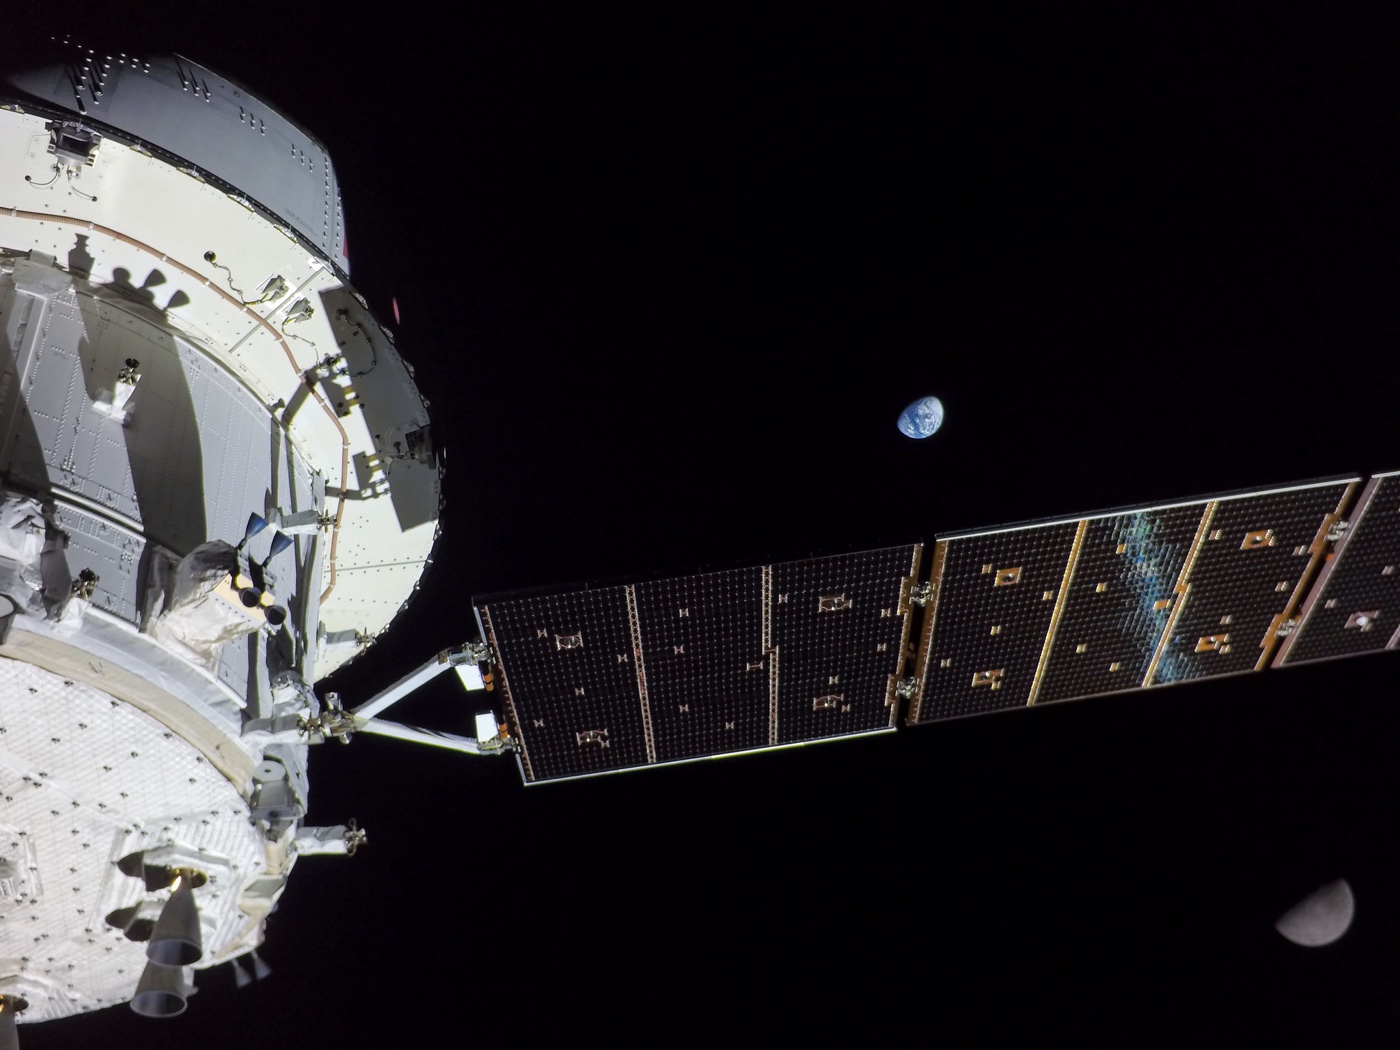 photo of the Moon and Earth with the Artemis I spacecraft in the foreground